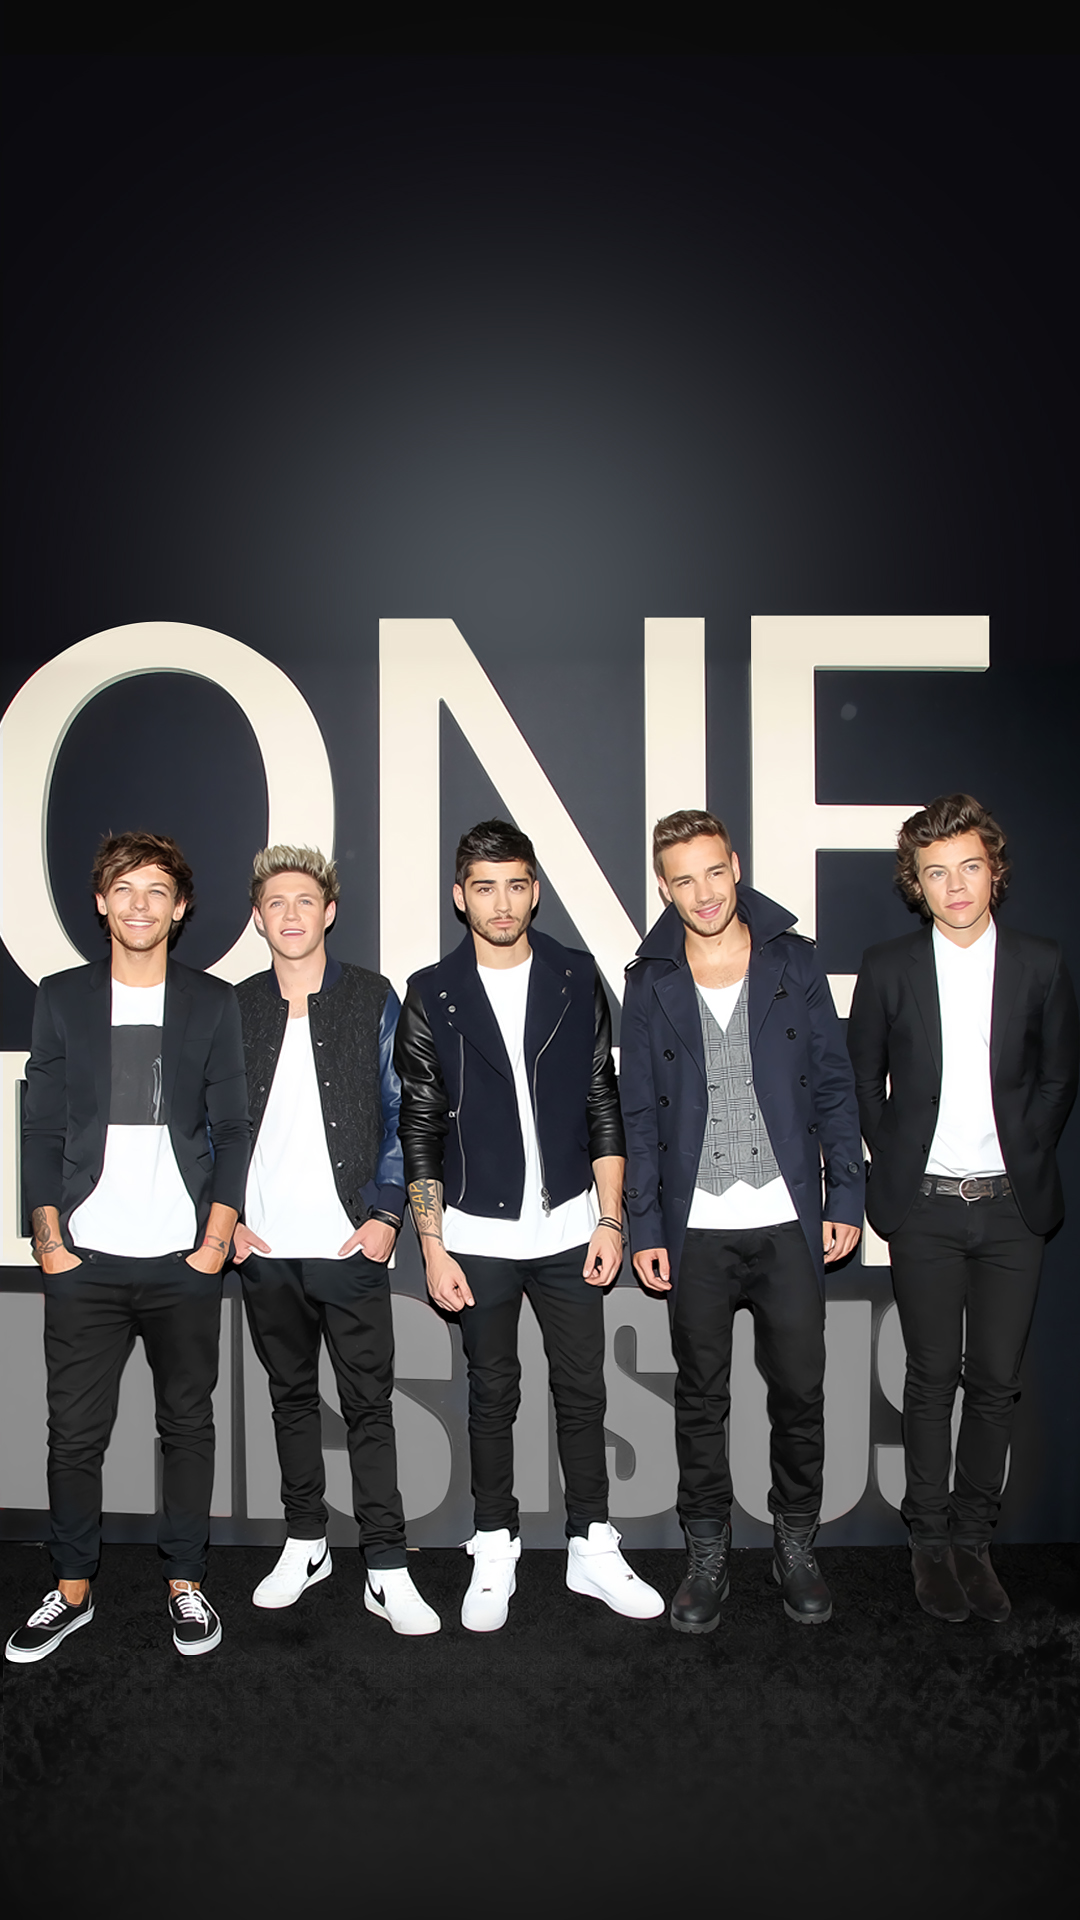 One Direction wallpaper for mobile phones   One Direction 1080x1920